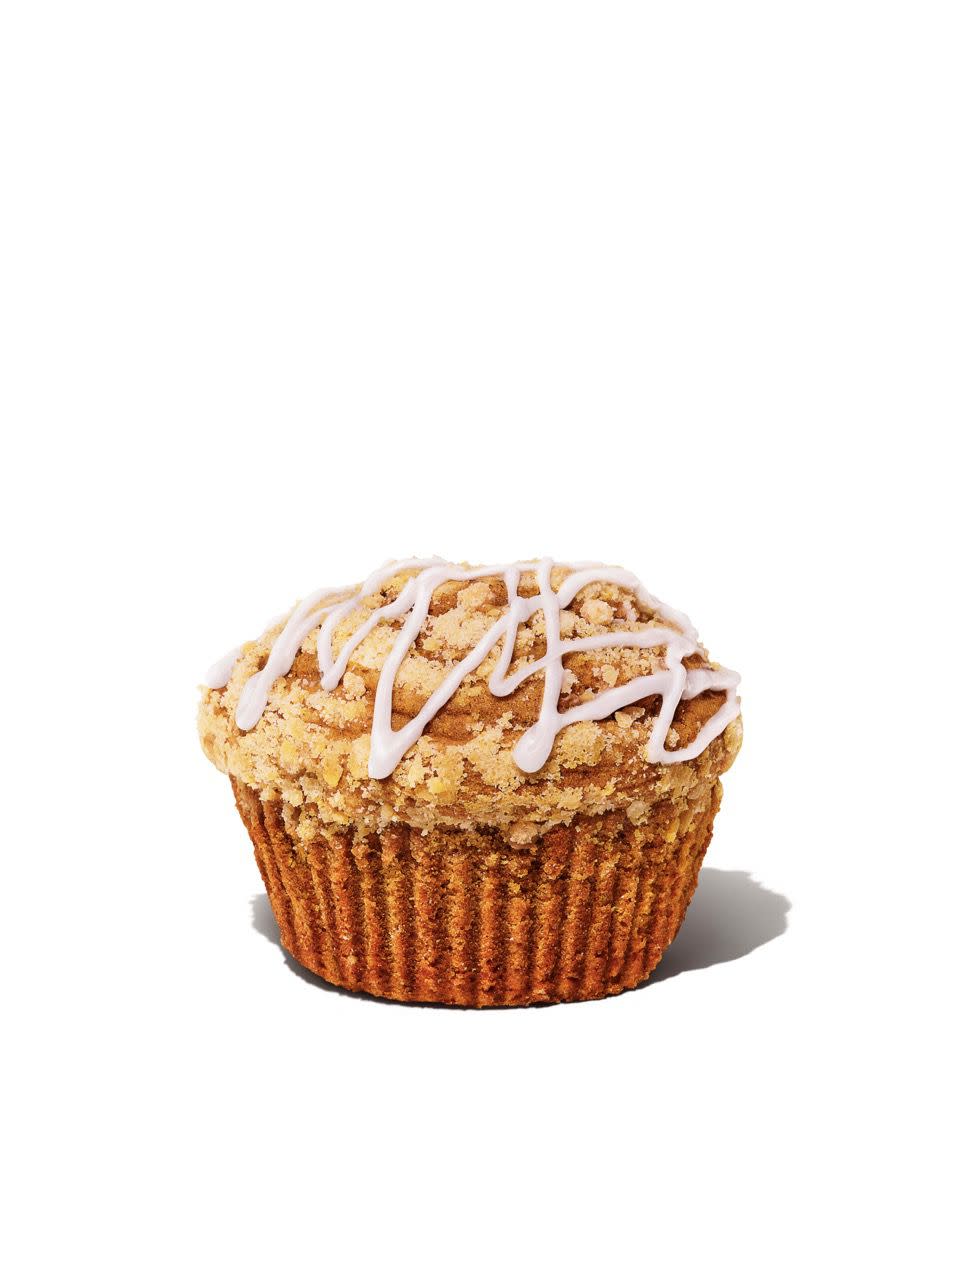 Dunkin' Retail 23 Window 5 Retouched Product Image: Pumpkin Muffin
(image + shadow + white background/transparency)